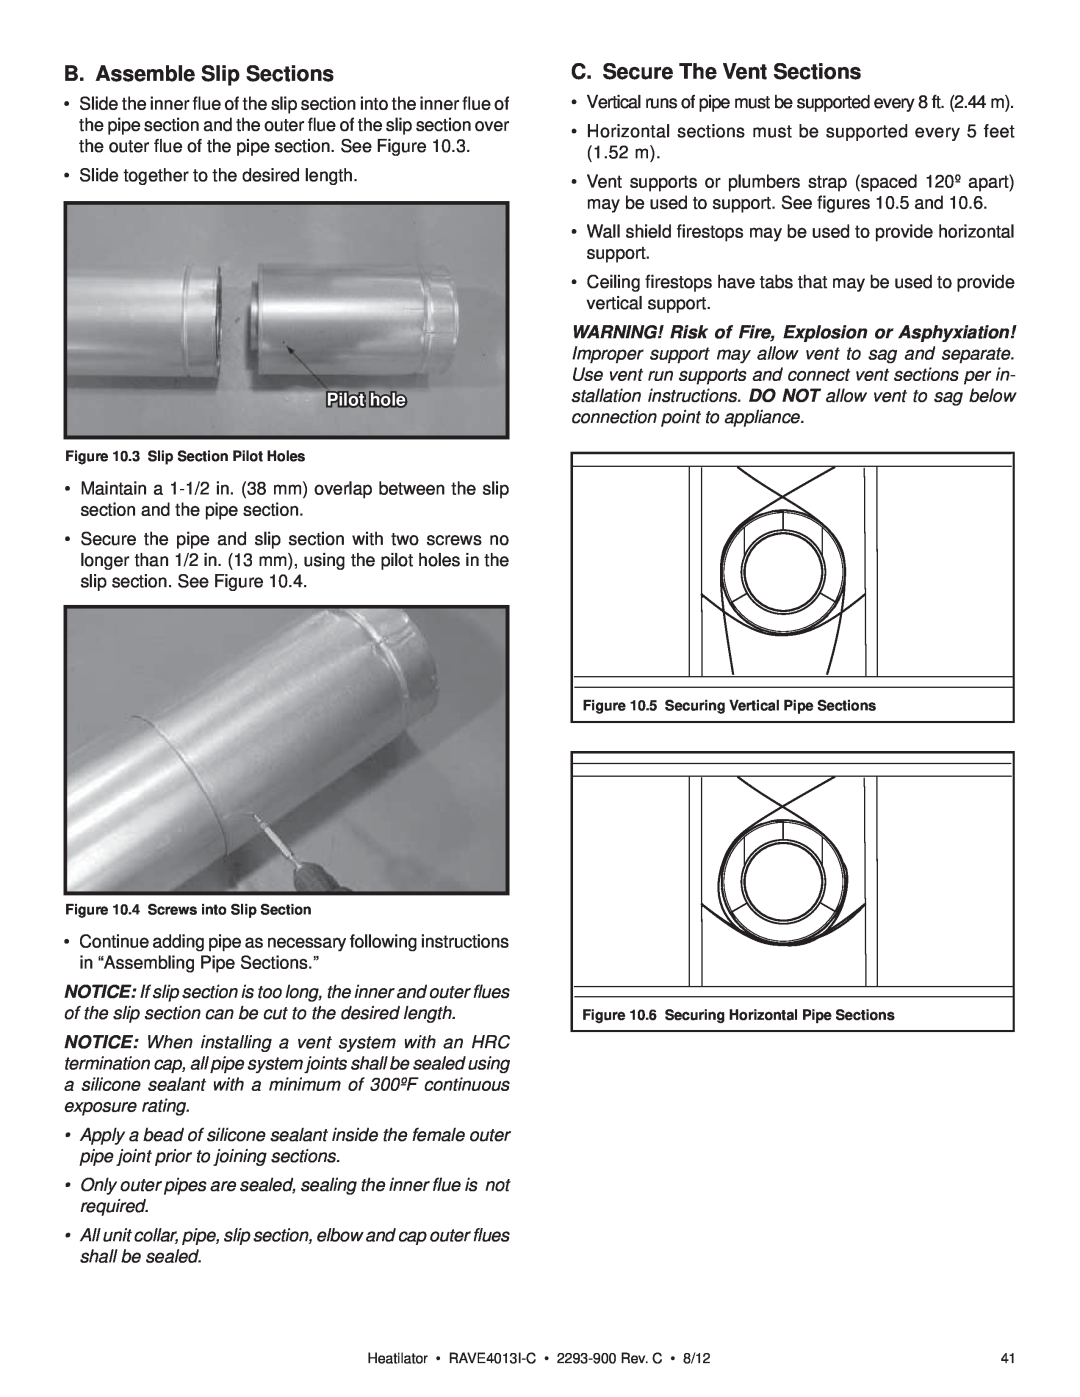 Heatiator Rave4013i-c owner manual B. Assemble Slip Sections, C. Secure The Vent Sections, Pilot hole 